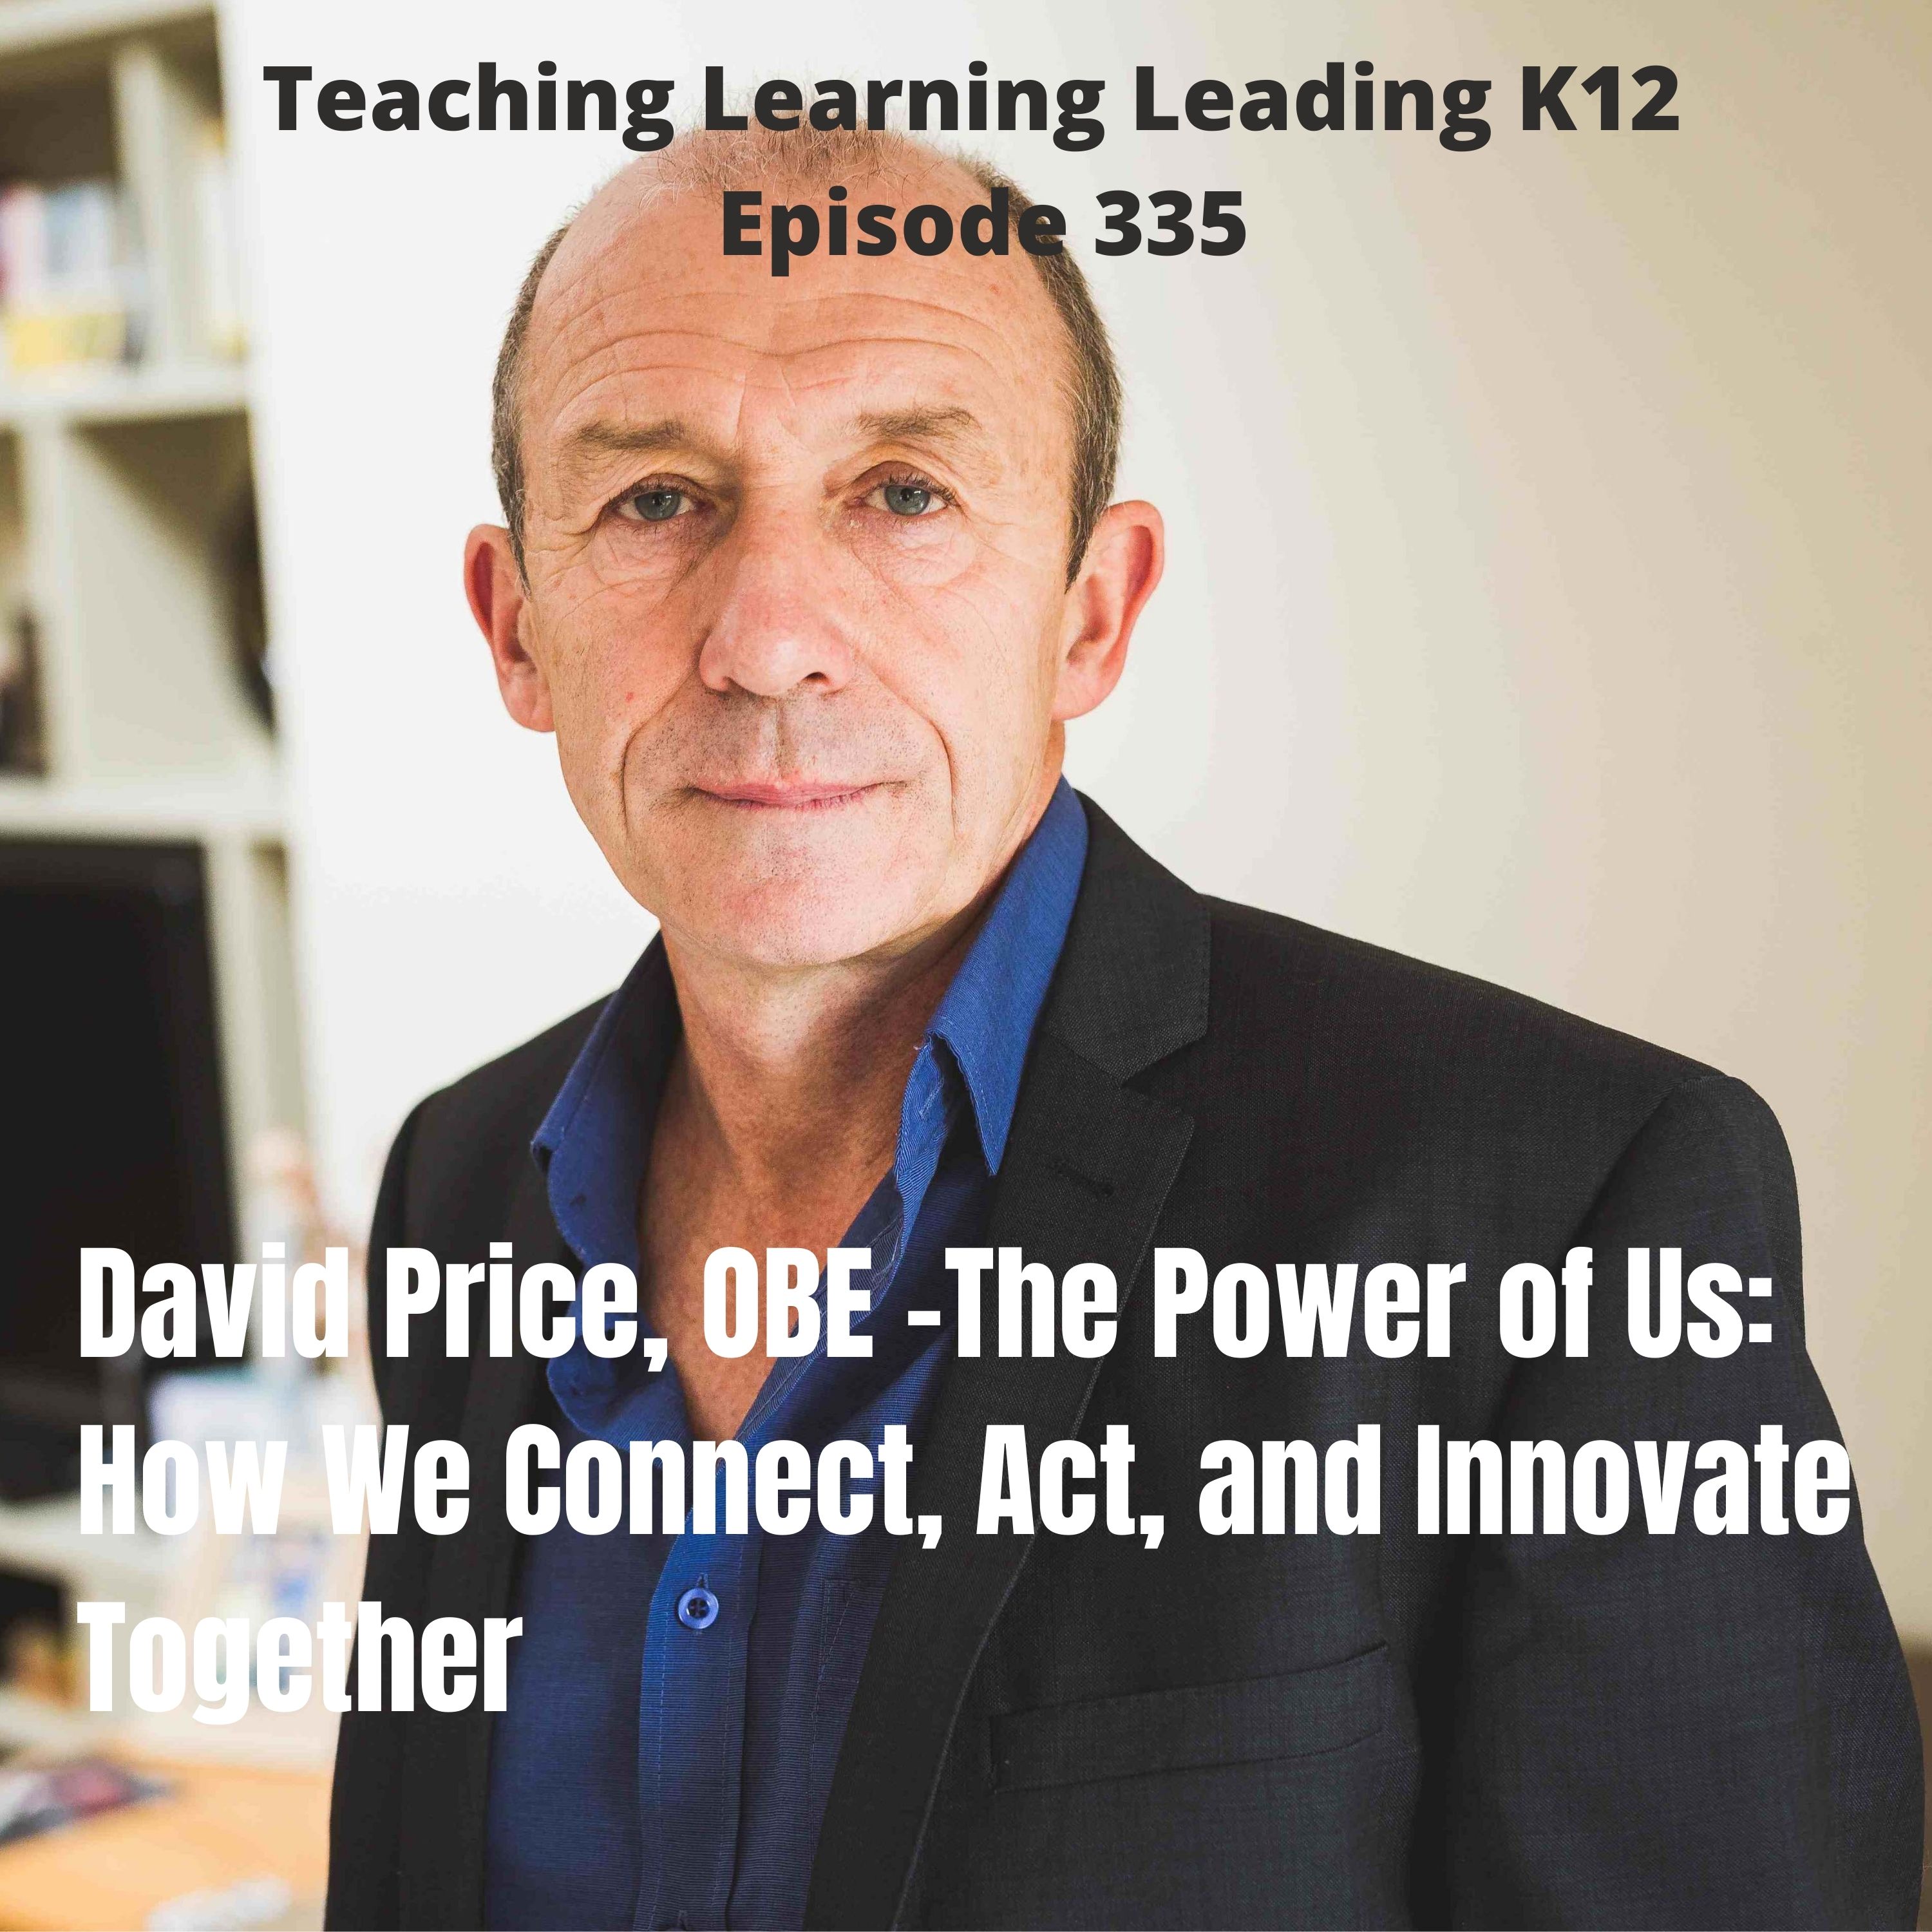 David Price, O.B.E. - The Power of Us: How We Connect, Act, and Innovate Together - 335 Image